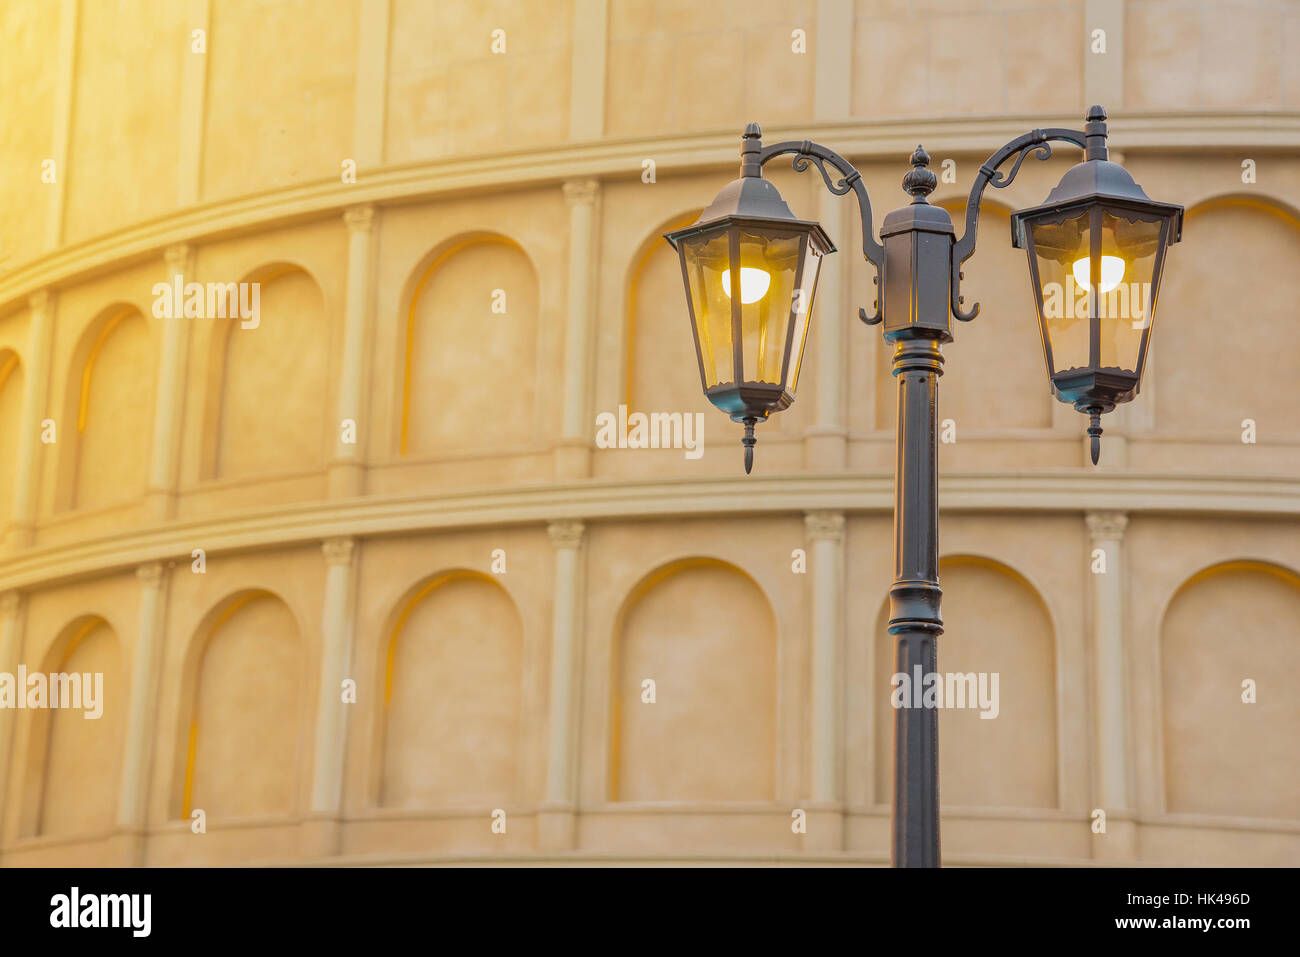 Street Classic Lamp With Ancient Building, Vintage Concept Background Stock Photo